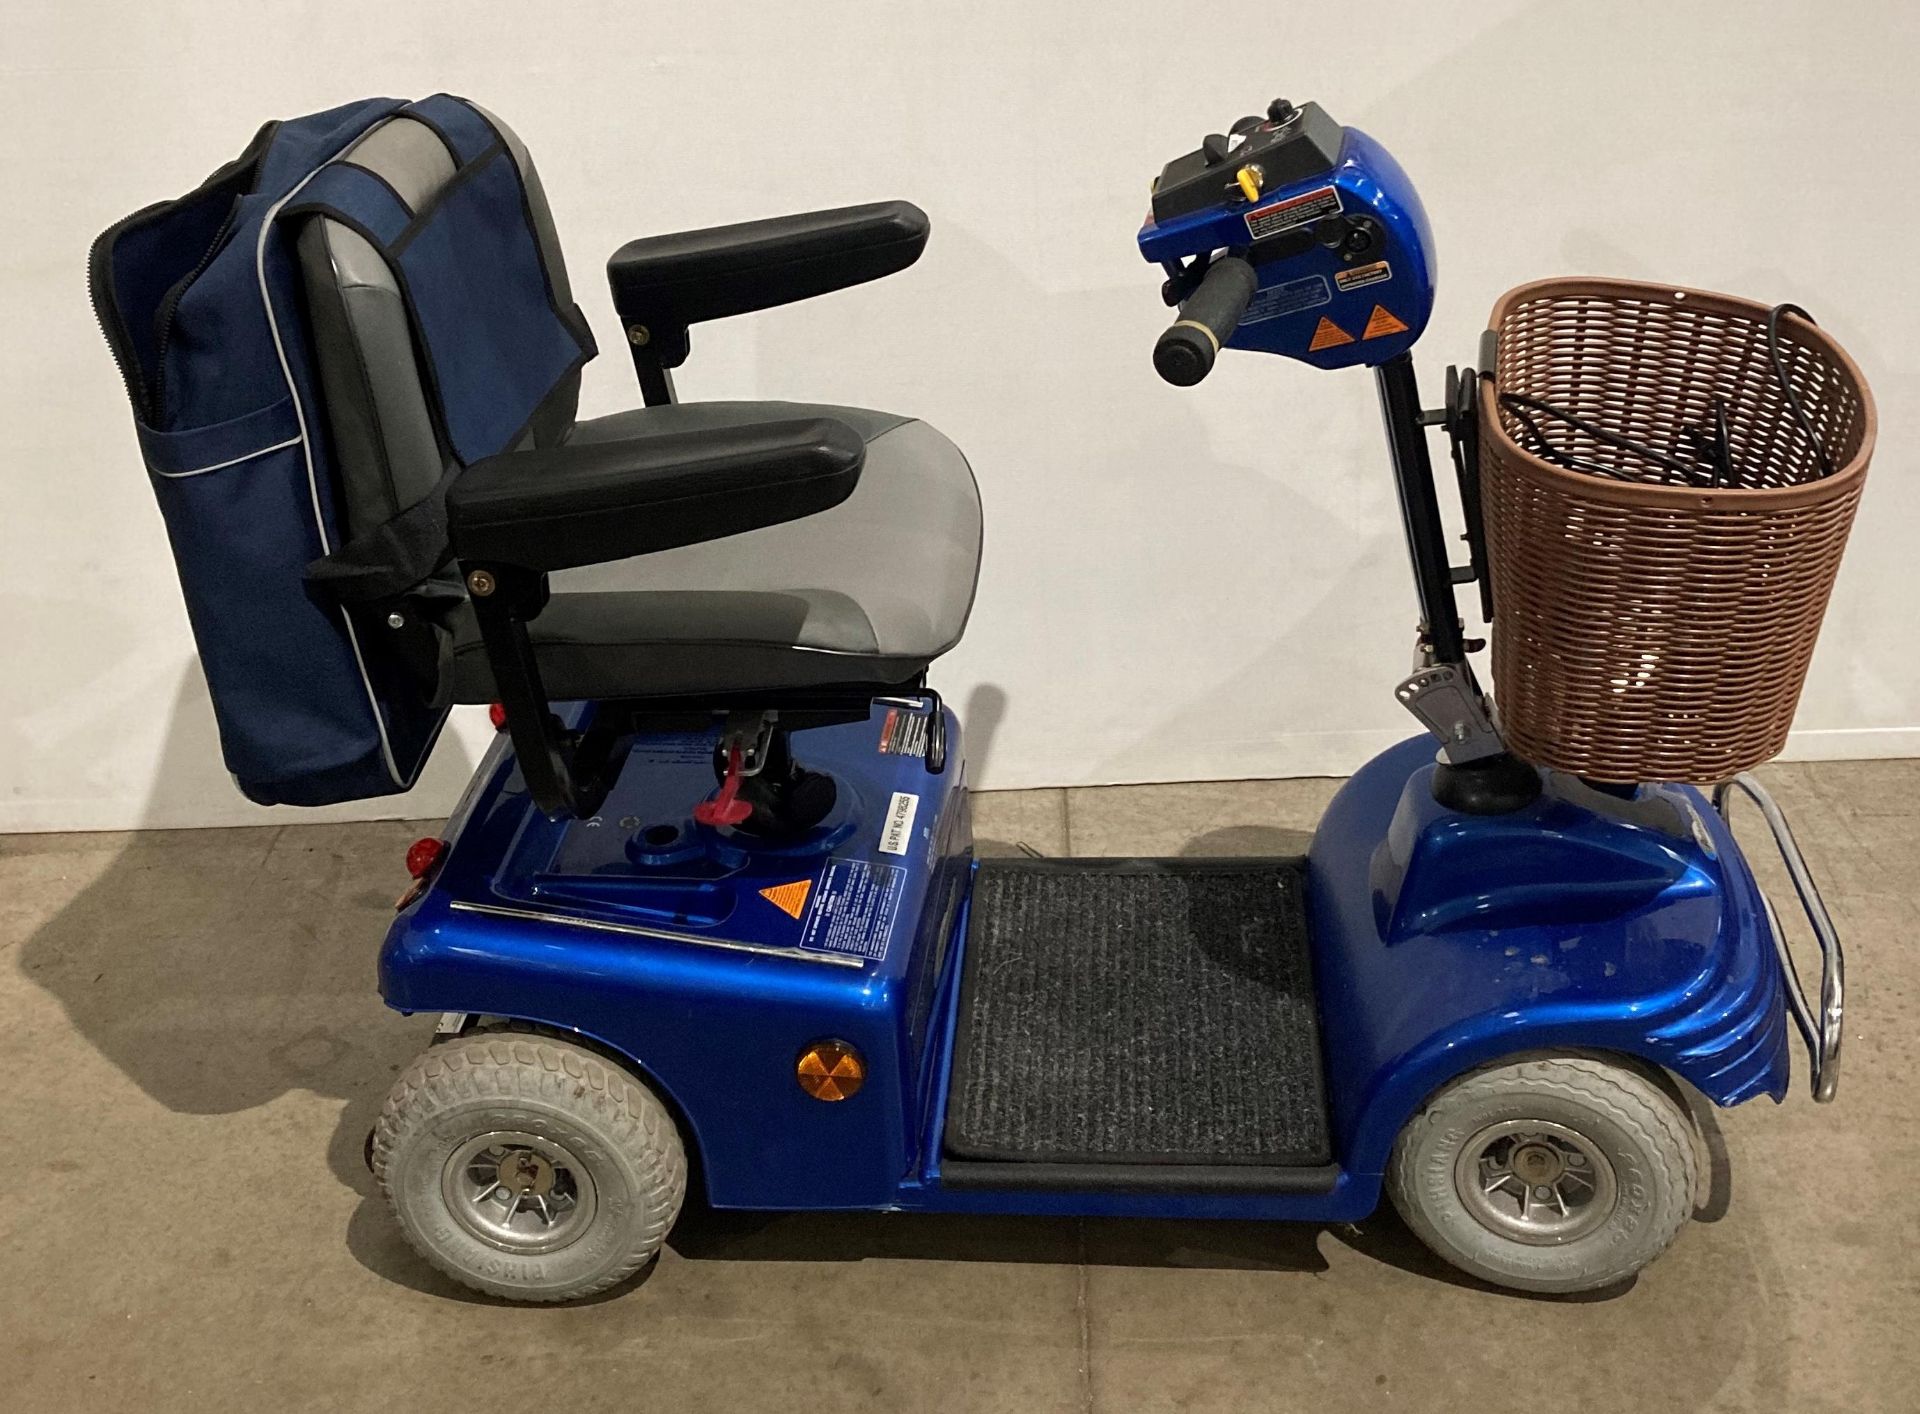 PATHMASTER MOBILITY SCOOTER in blue, complete with key, charger,